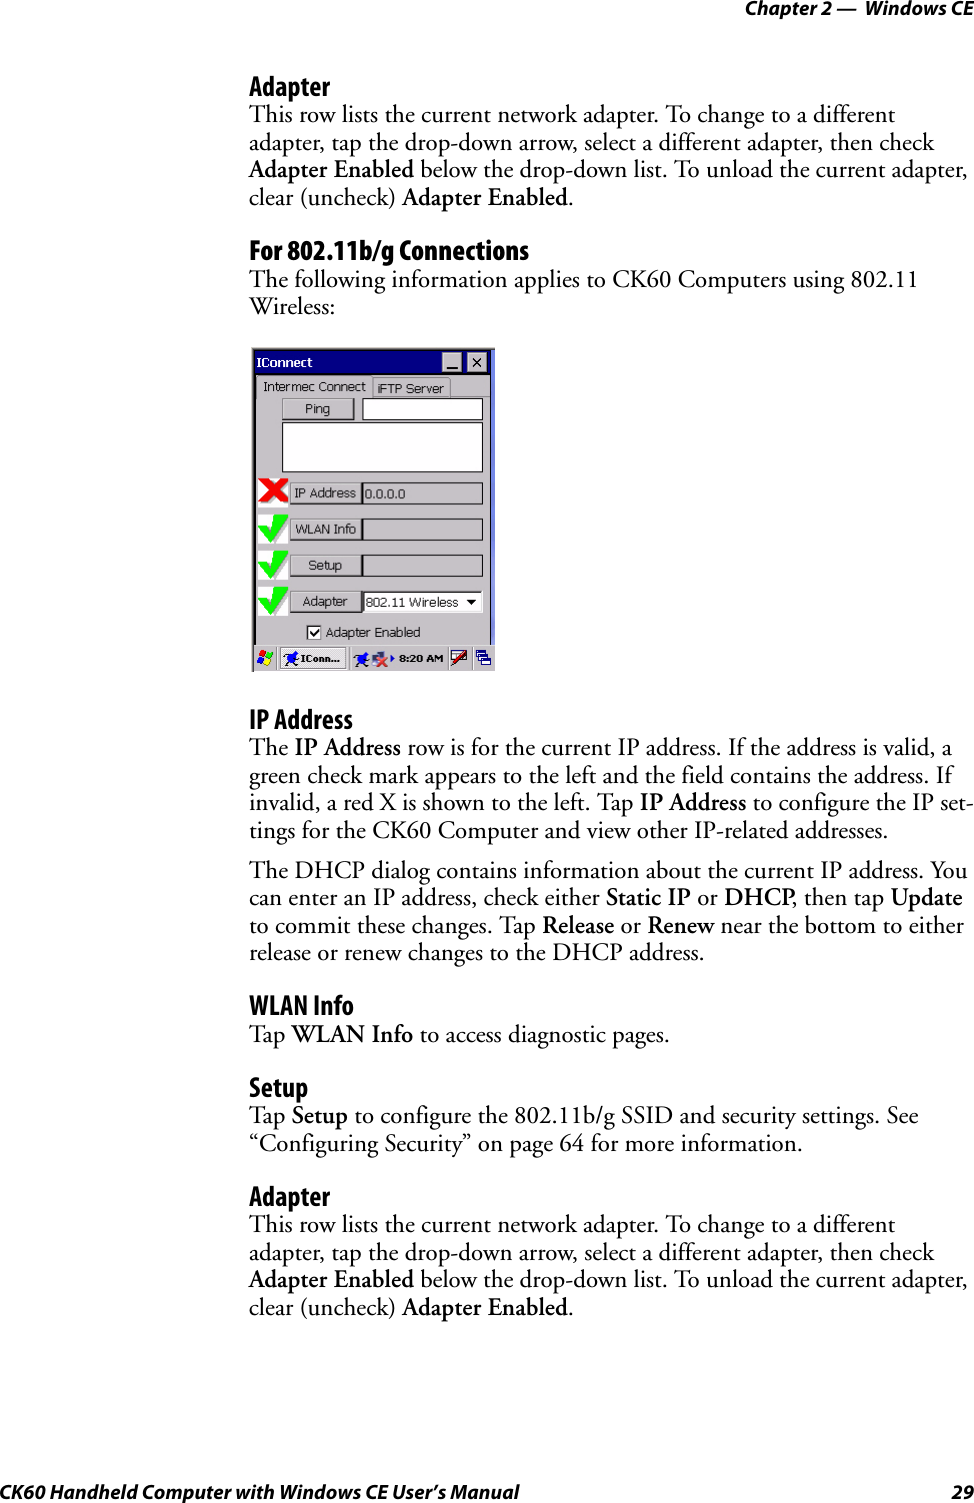 Chapter 2 —  Windows CECK60 Handheld Computer with Windows CE User’s Manual 29AdapterThis row lists the current network adapter. To change to a different adapter, tap the drop-down arrow, select a different adapter, then check Adapter Enabled below the drop-down list. To unload the current adapter, clear (uncheck) Adapter Enabled.For 802.11b/g ConnectionsThe following information applies to CK60 Computers using 802.11 Wireless:IP AddressThe IP Address row is for the current IP address. If the address is valid, a green check mark appears to the left and the field contains the address. If invalid, a red X is shown to the left. Tap IP Address to configure the IP set-tings for the CK60 Computer and view other IP-related addresses.The DHCP dialog contains information about the current IP address. You can enter an IP address, check either Static IP or DHCP, then tap Update to commit these changes. Tap Release or Renew near the bottom to either release or renew changes to the DHCP address.WLAN InfoTap WLAN Info to access diagnostic pages.SetupTap Setup to configure the 802.11b/g SSID and security settings. See “Configuring Security” on page 64 for more information.AdapterThis row lists the current network adapter. To change to a different adapter, tap the drop-down arrow, select a different adapter, then check Adapter Enabled below the drop-down list. To unload the current adapter, clear (uncheck) Adapter Enabled.